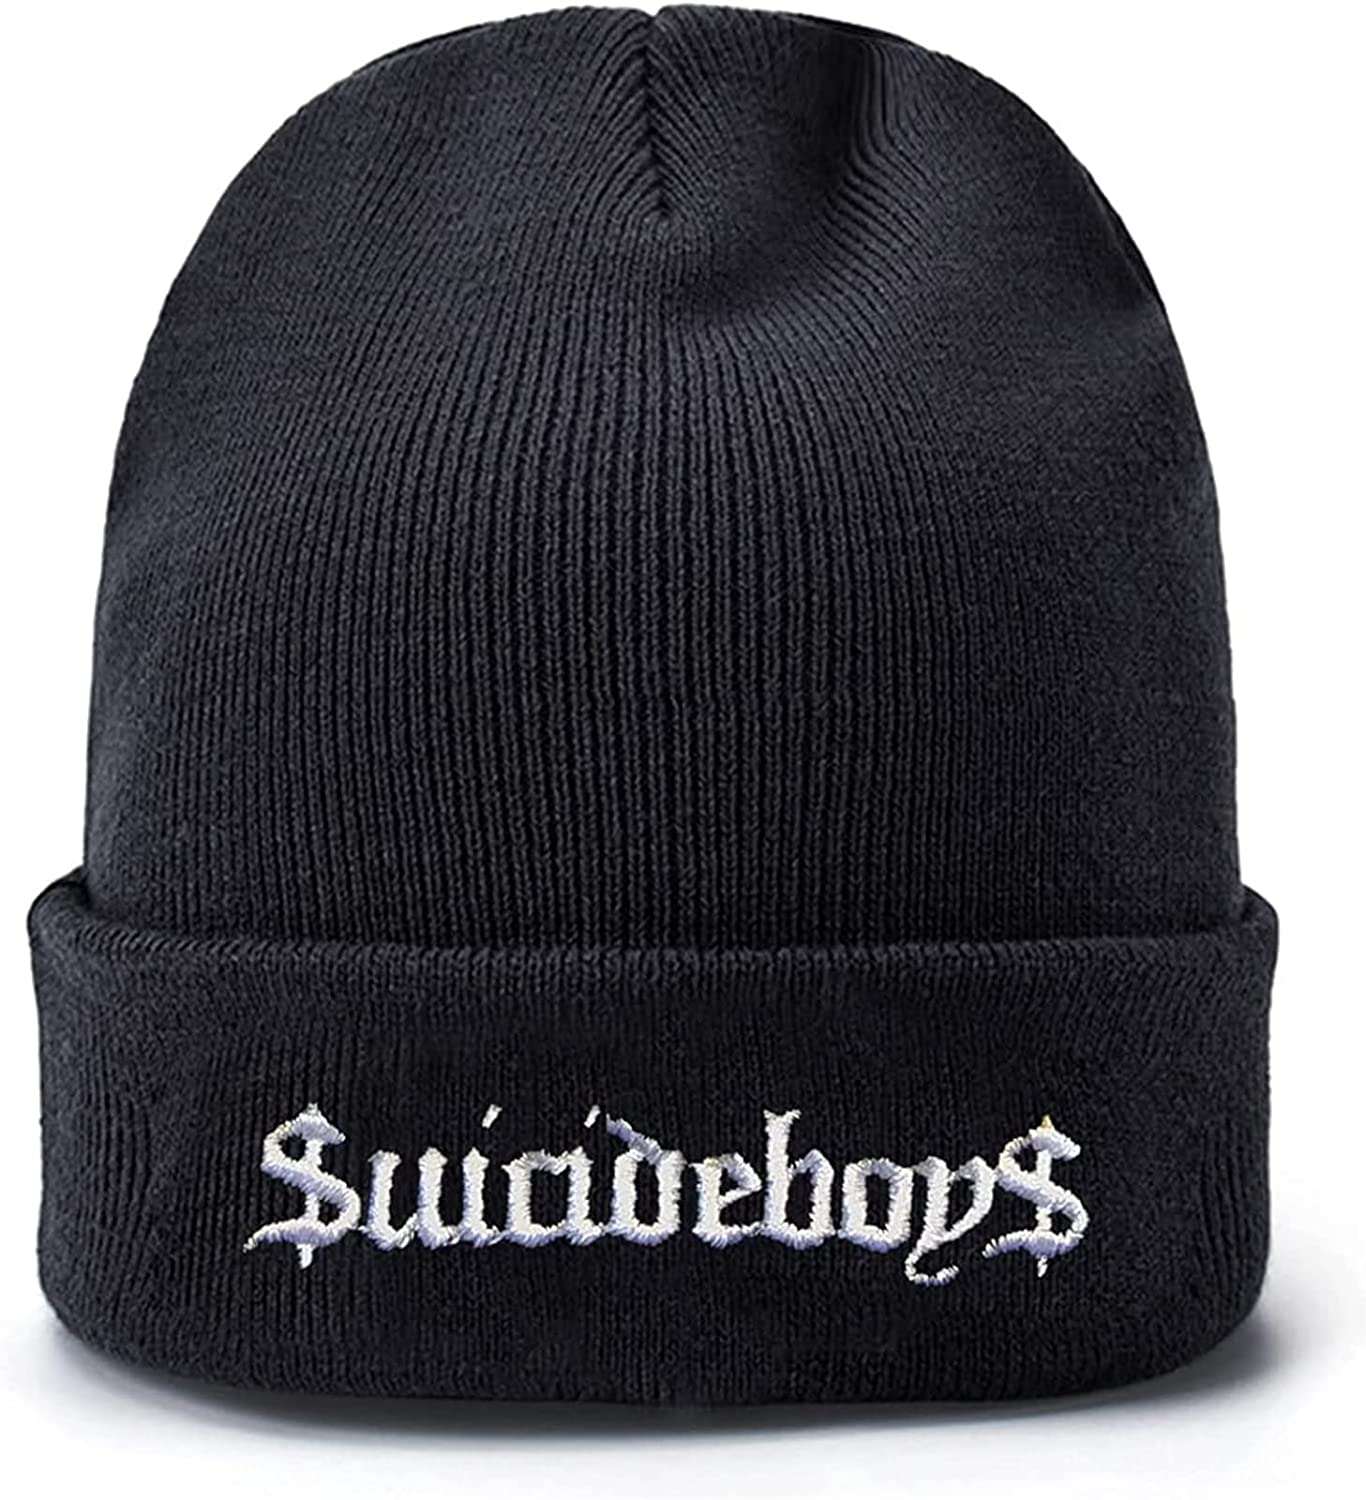 Women Suicide gogoherhome Toboggan Stretchy Warm Hats for Beanie Knit Black Logo Weather for Soft Cap Cold Embroidered Men Boys